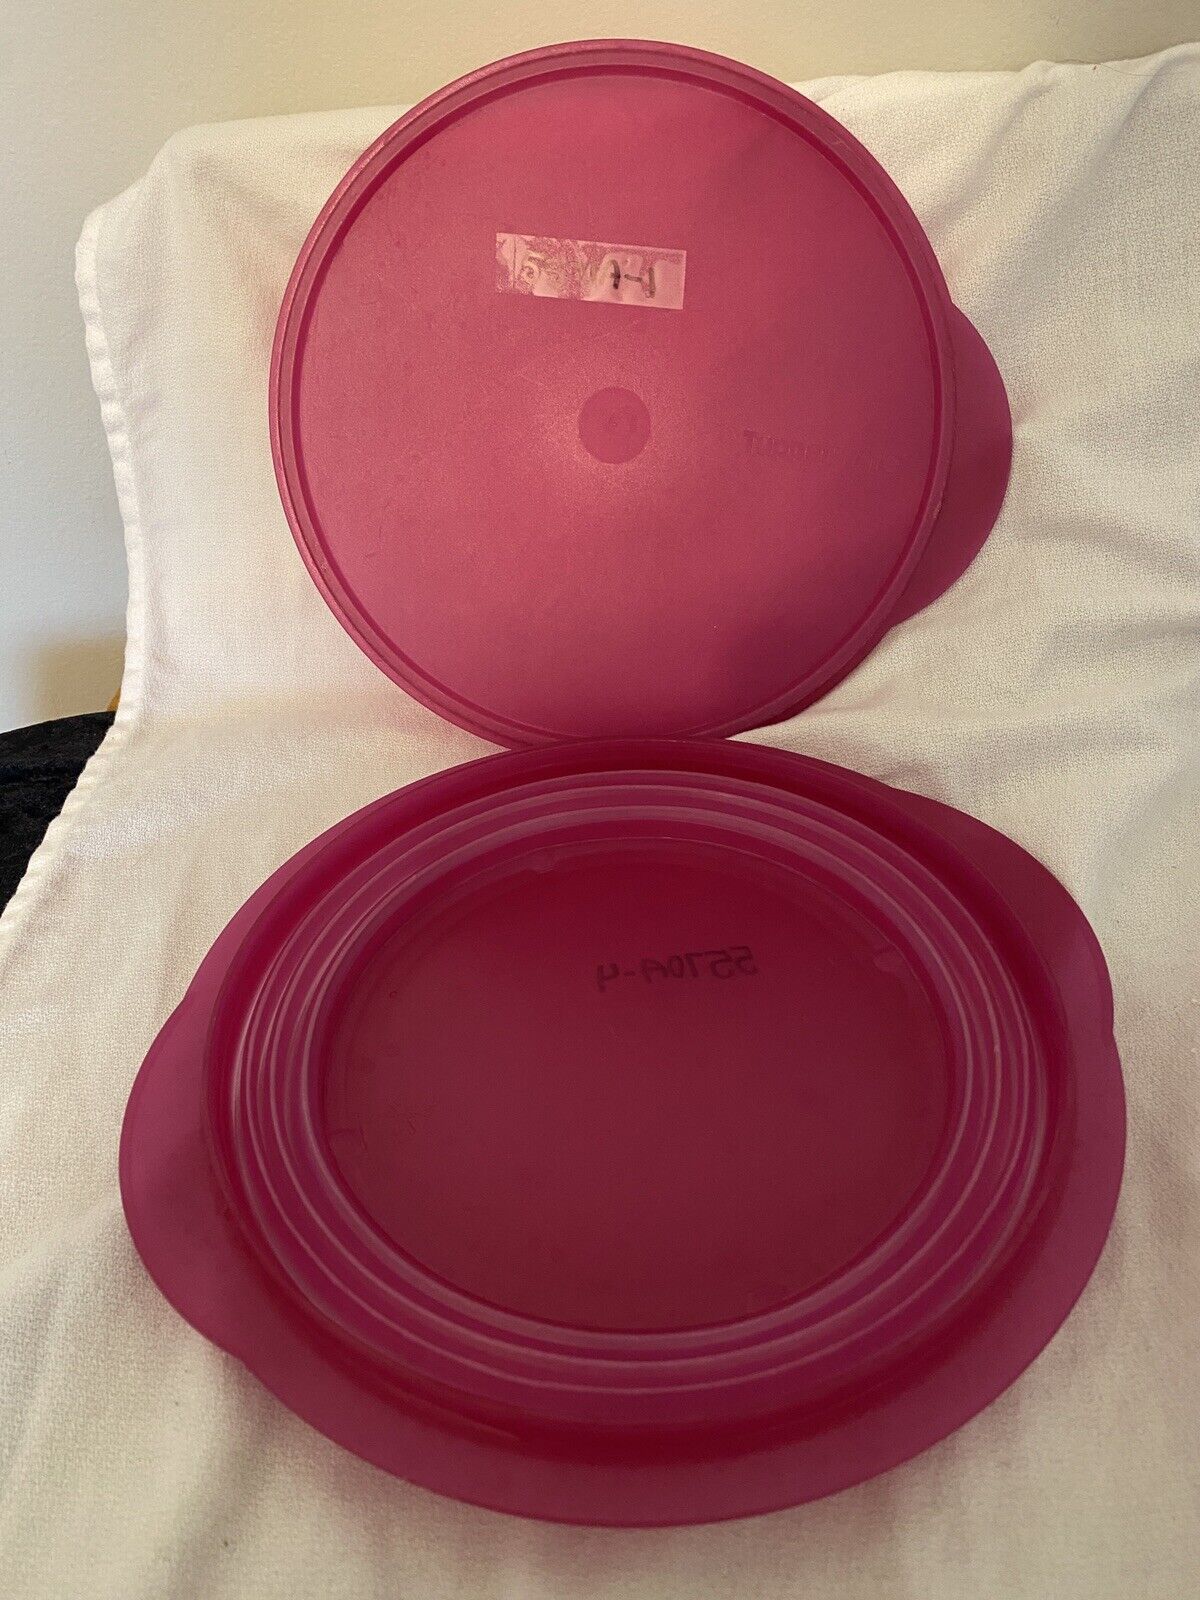 Tupperware  Flat Out Collapsible Folding Magenta Pink 8 1/4 C Bowl 5570A-4